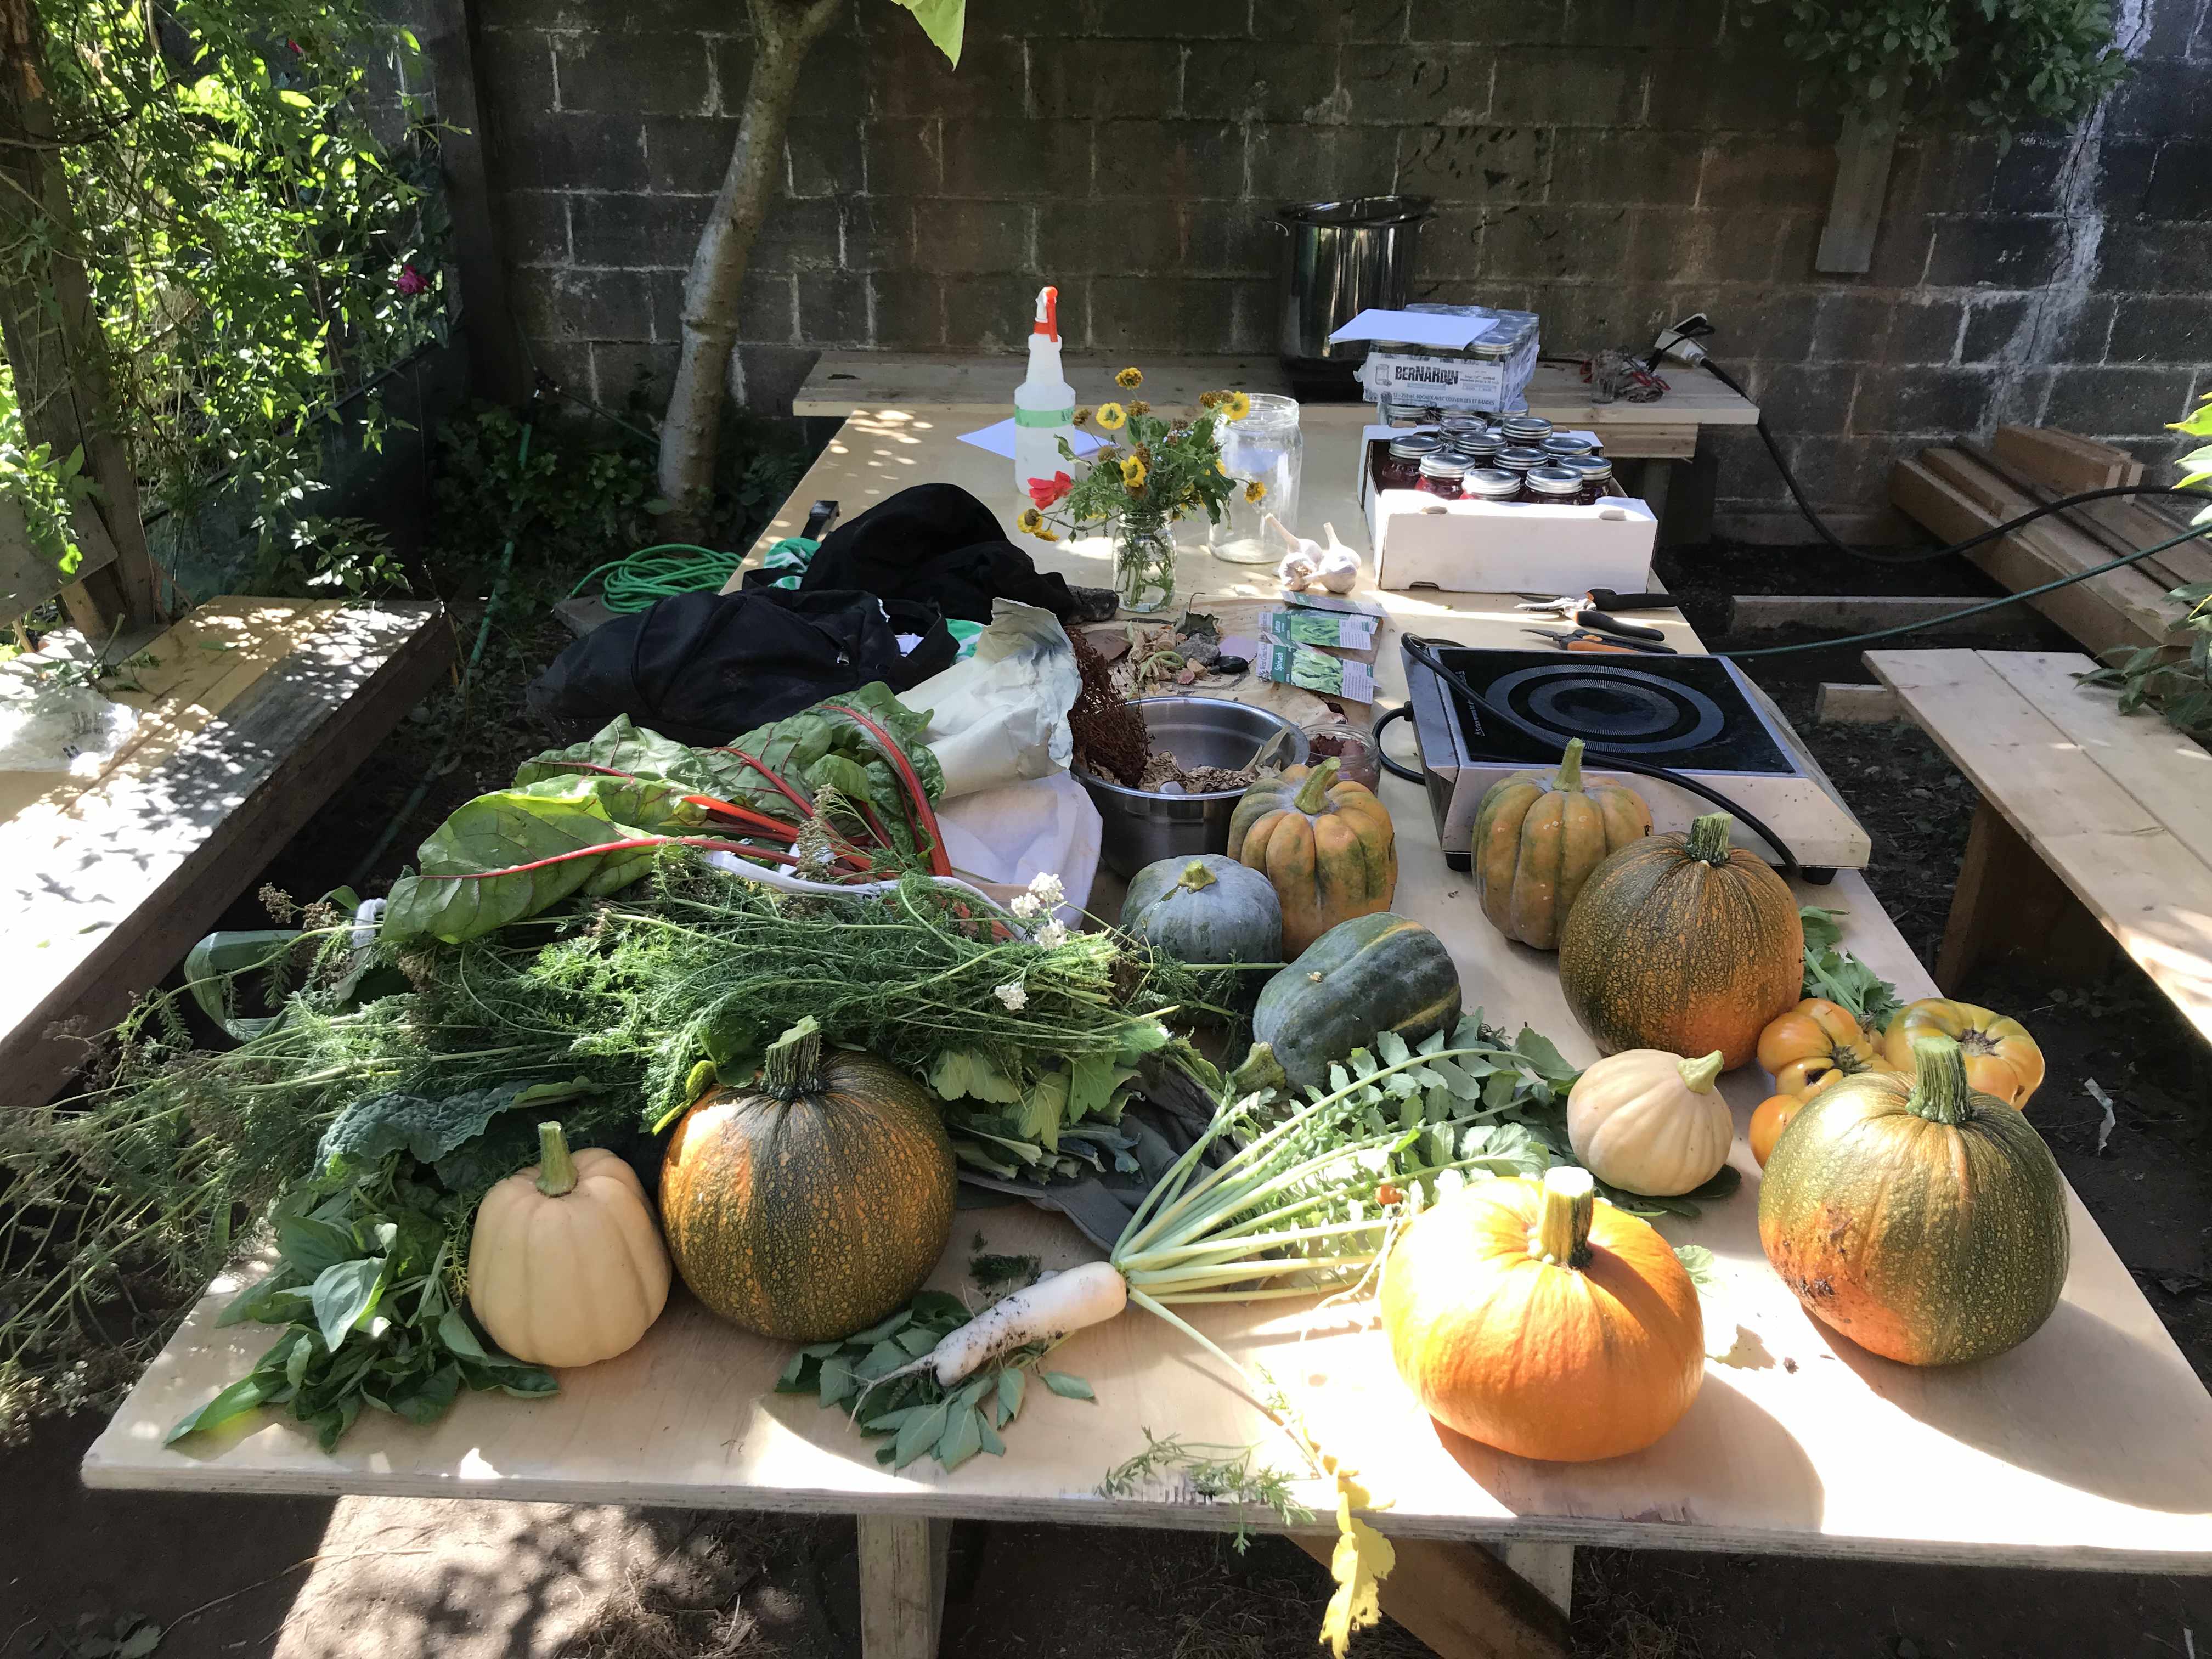 a table full of various vegetation grown in the garden, squash, pumpkins fennel, leafy greens alongside a portable induction element, a vase of flowers, a water sprayer and some jars full of preserves